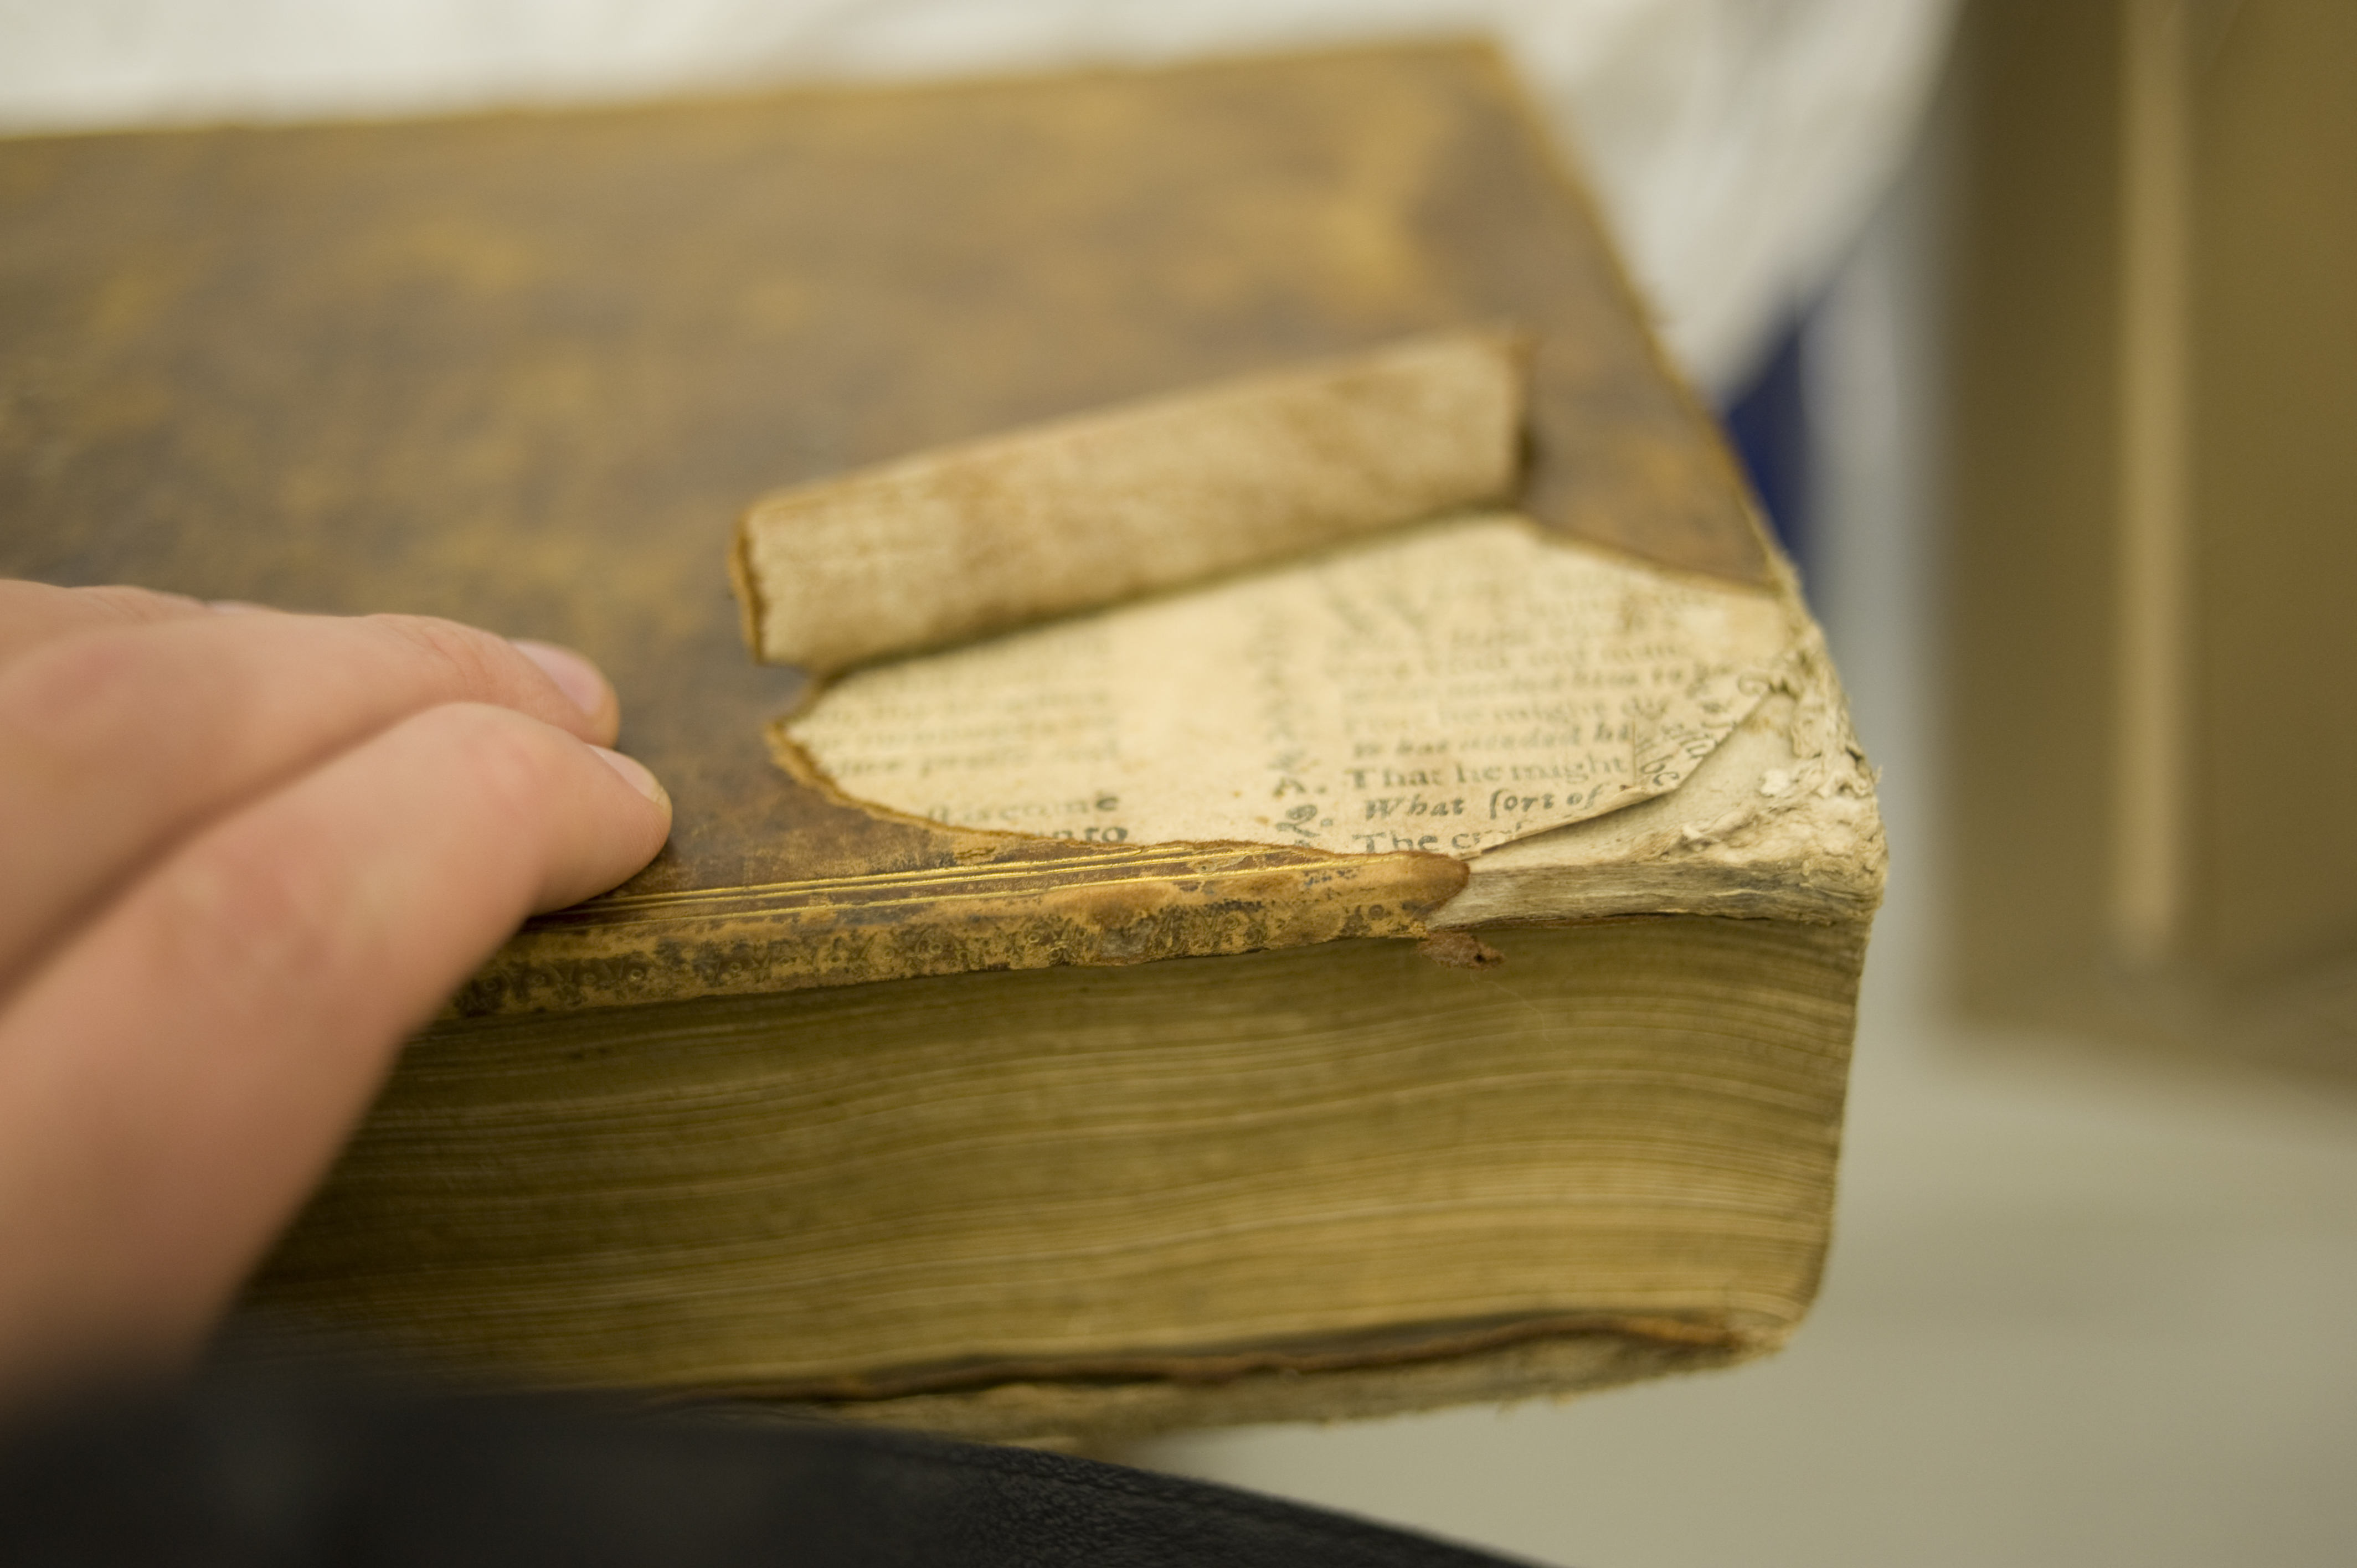 Torn leather on the back board of St Andrews r17 DG676.3M7 revealed more sheets of the same catechism had been used to make the boards of this book.